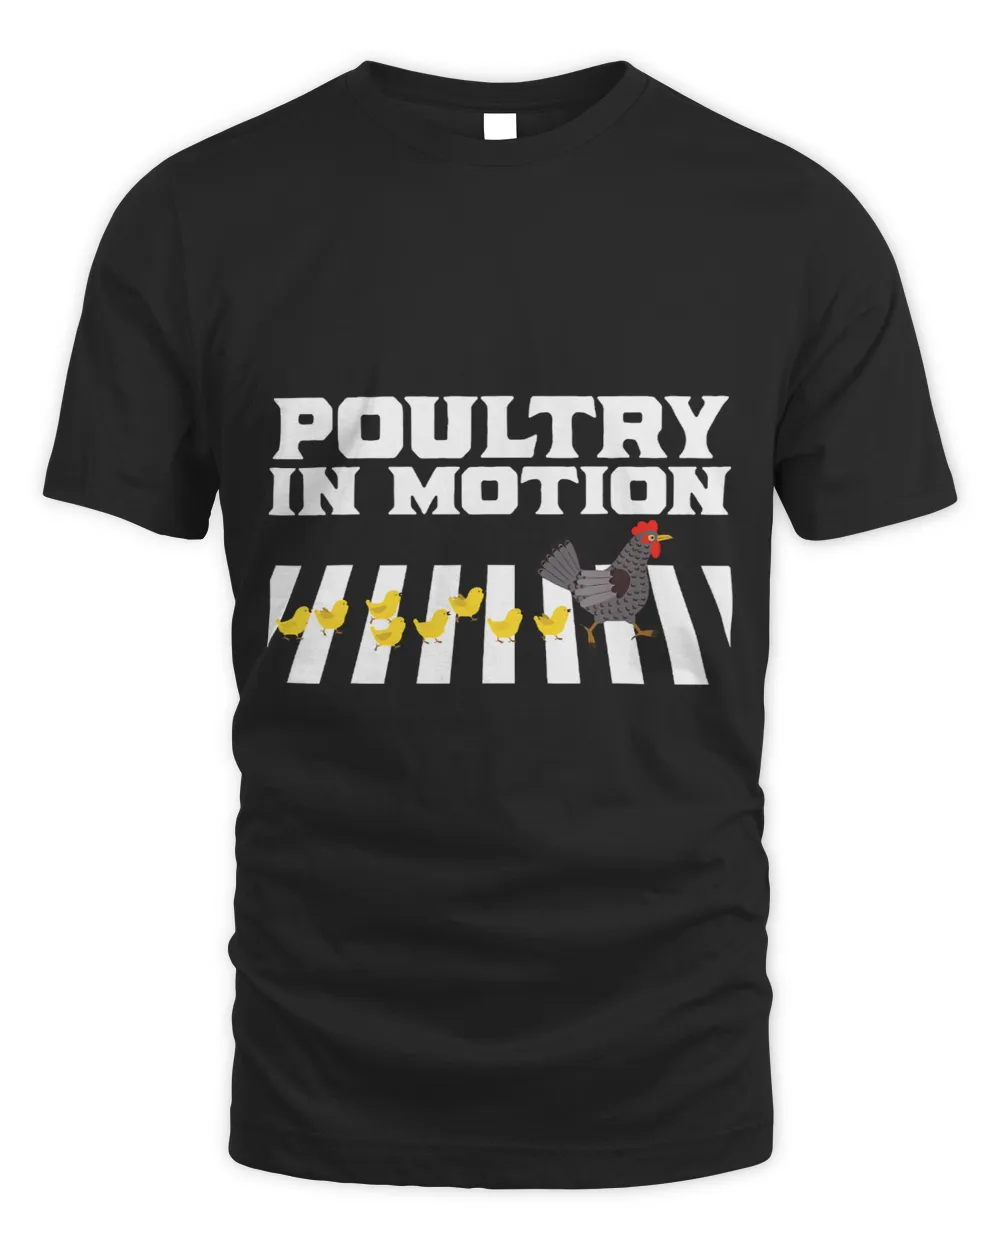 Chicken Poultry In Motion Funny Chicken Shirt